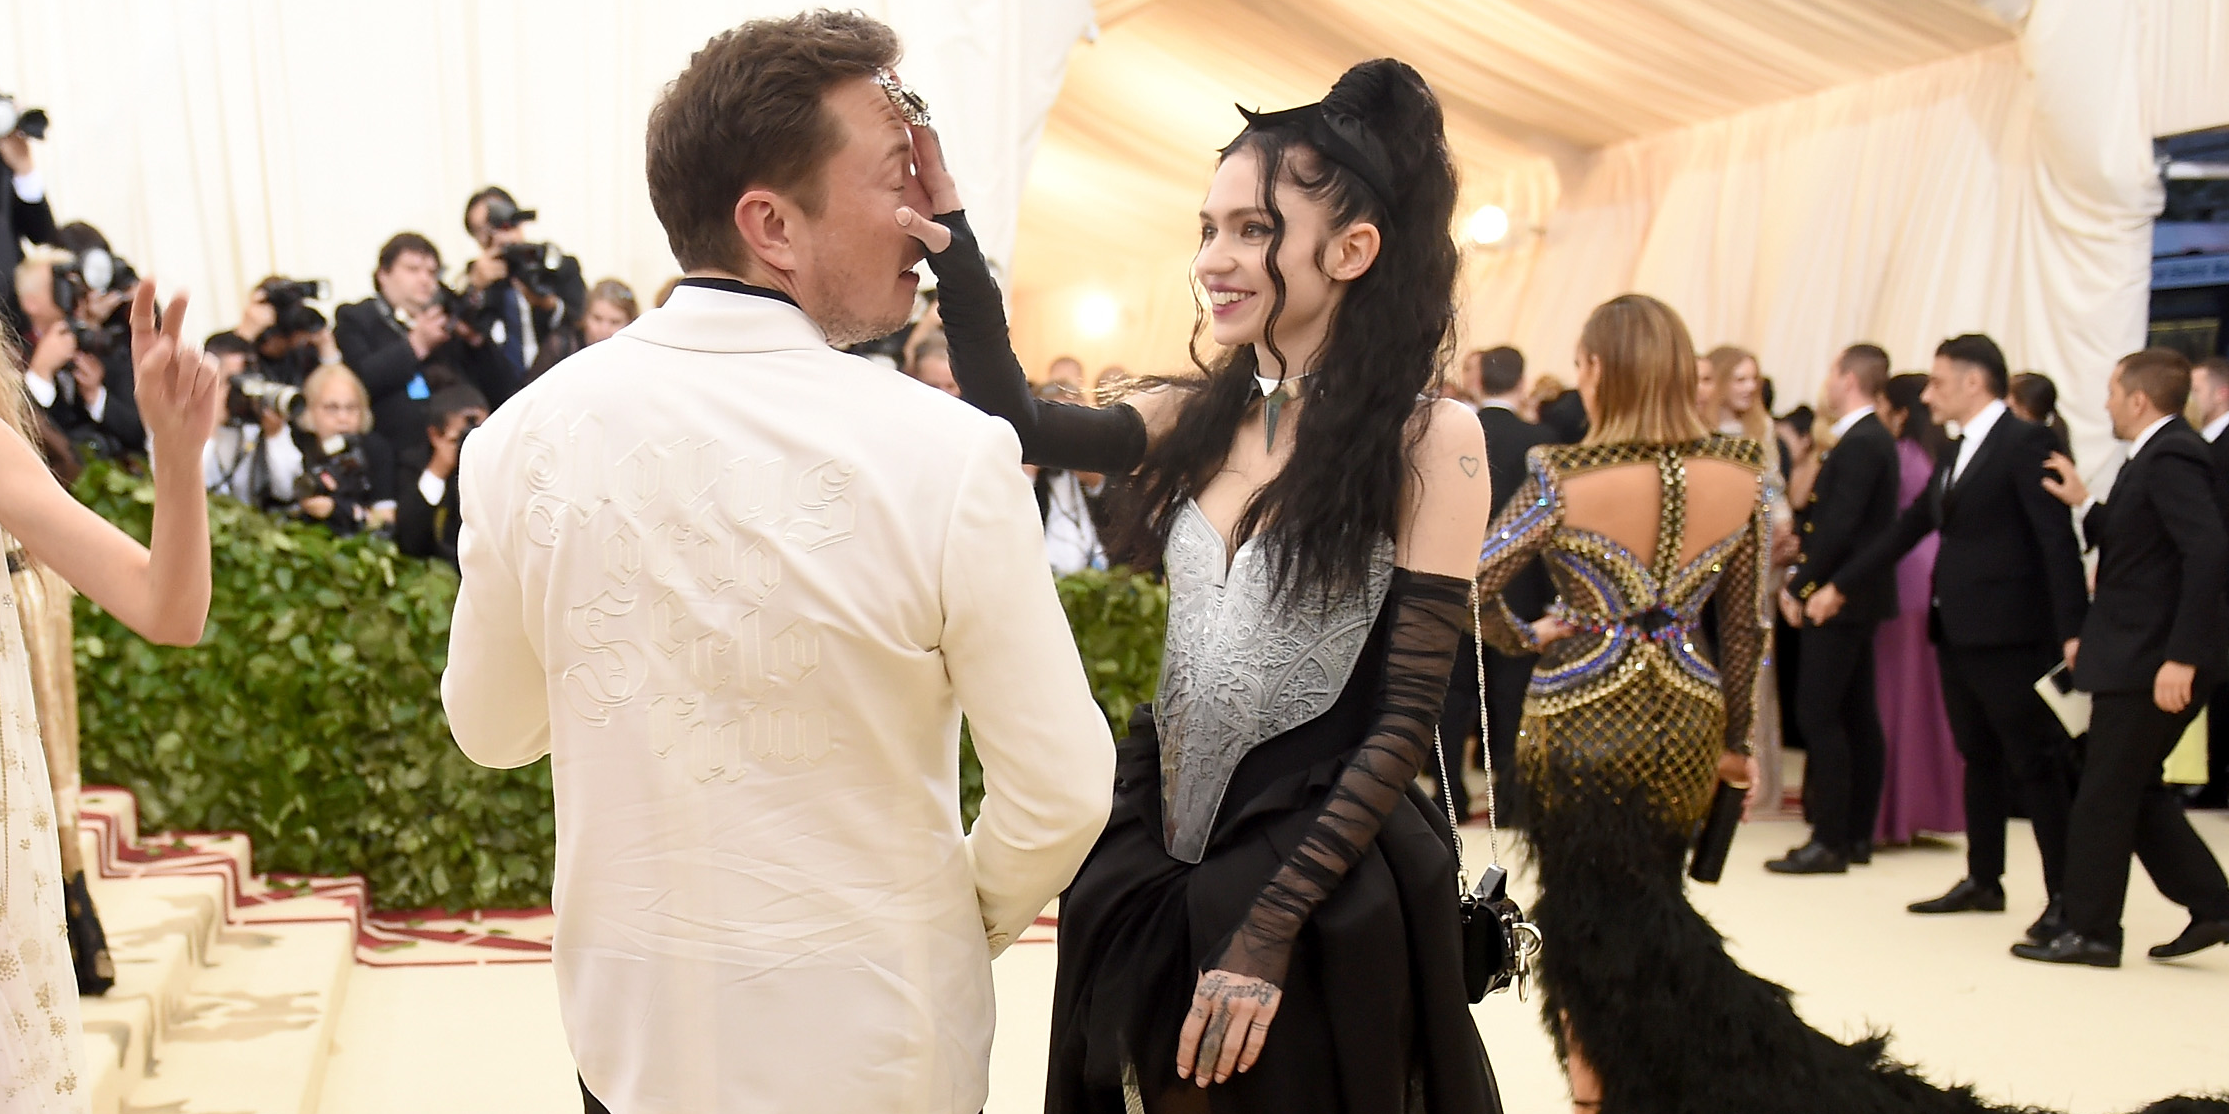 Elon Musk and Grimes might be expecting a baby — here’s where their relationship began and everything that’s happened since